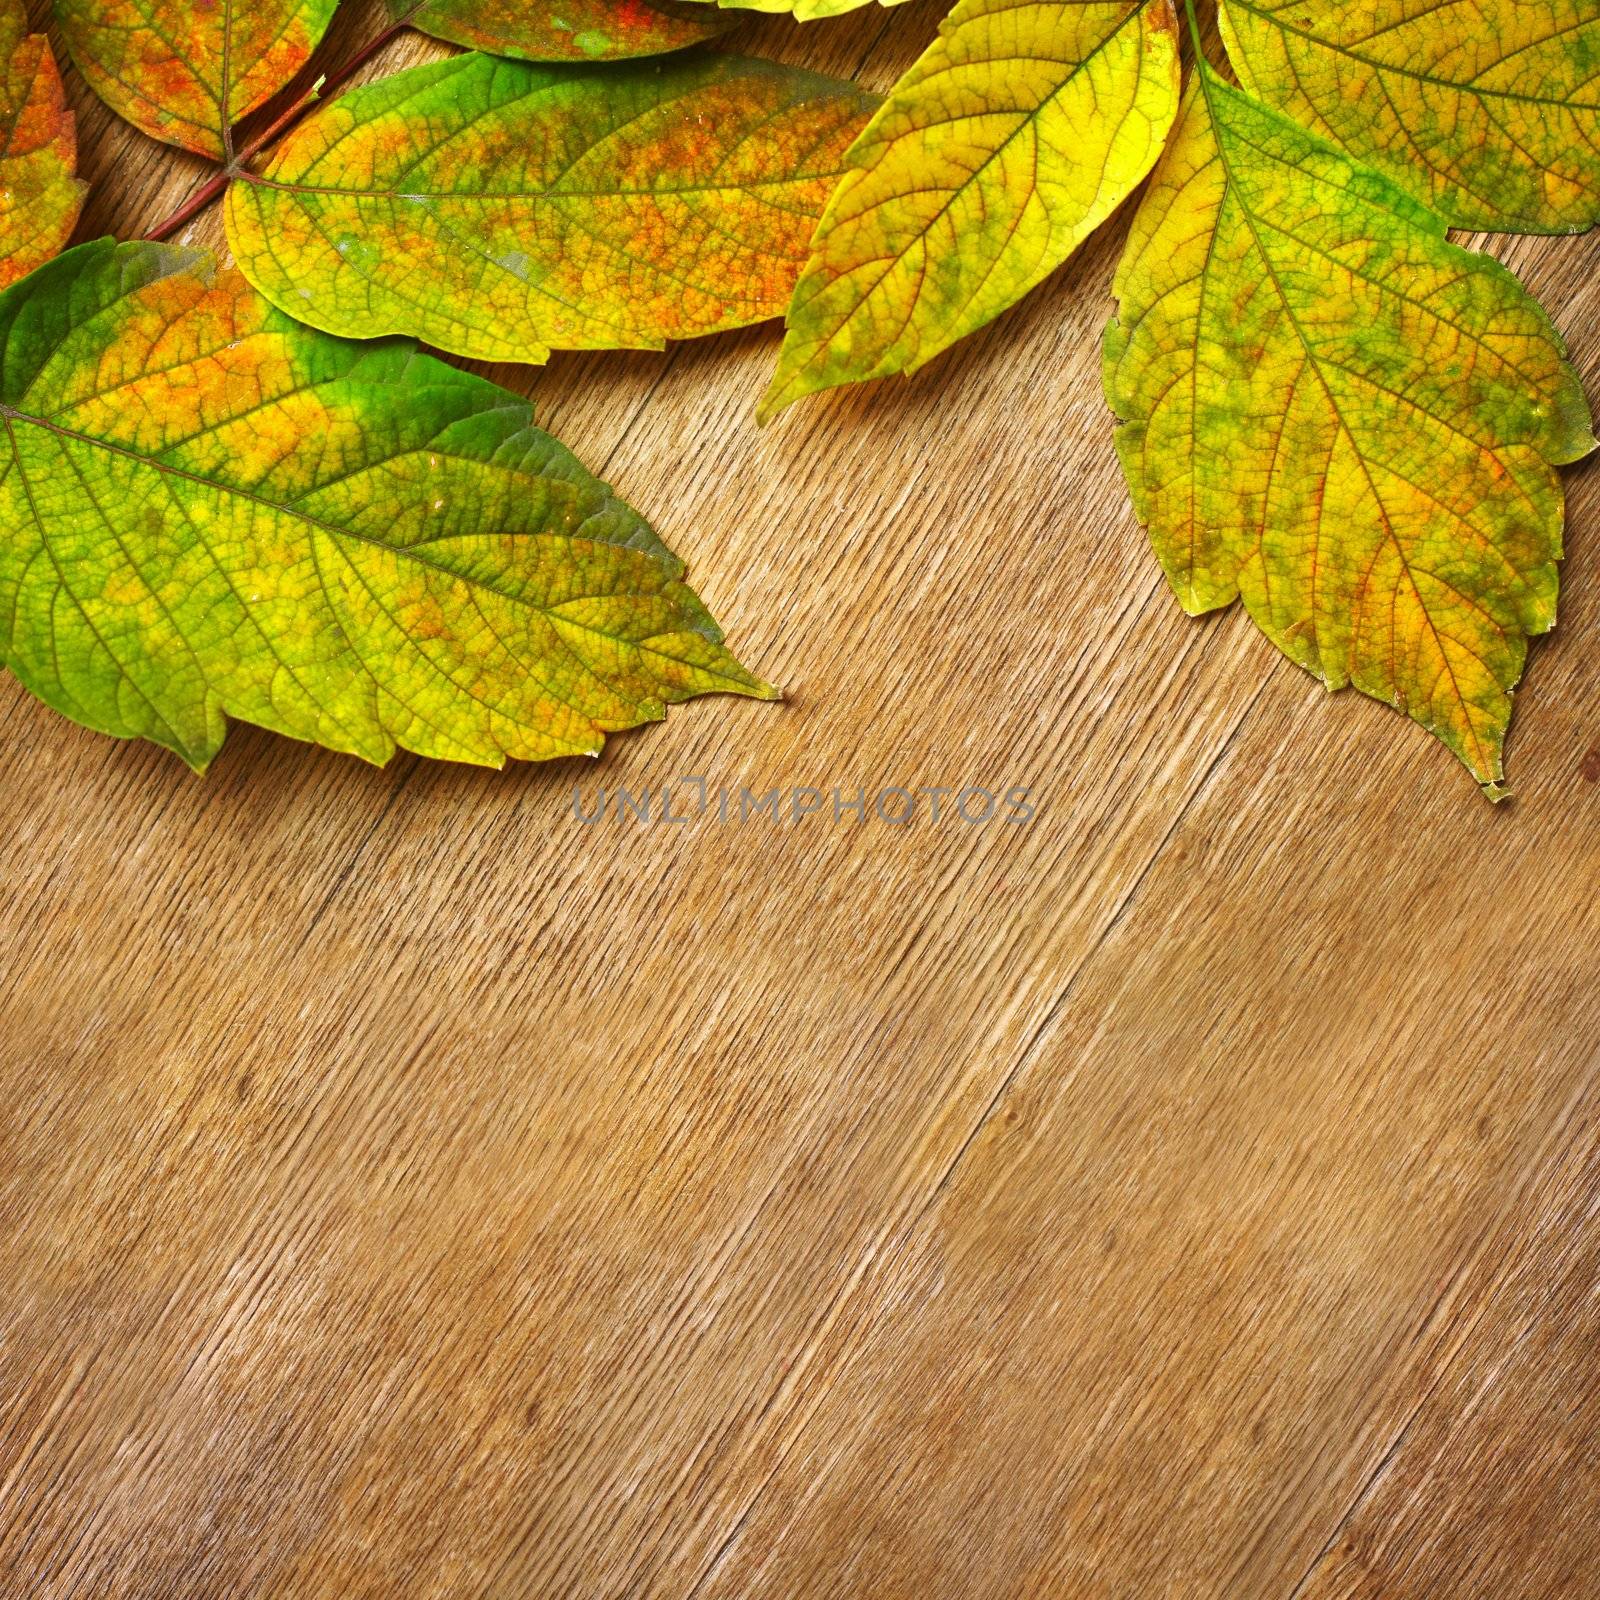 Autumn Leaves over wooden background.